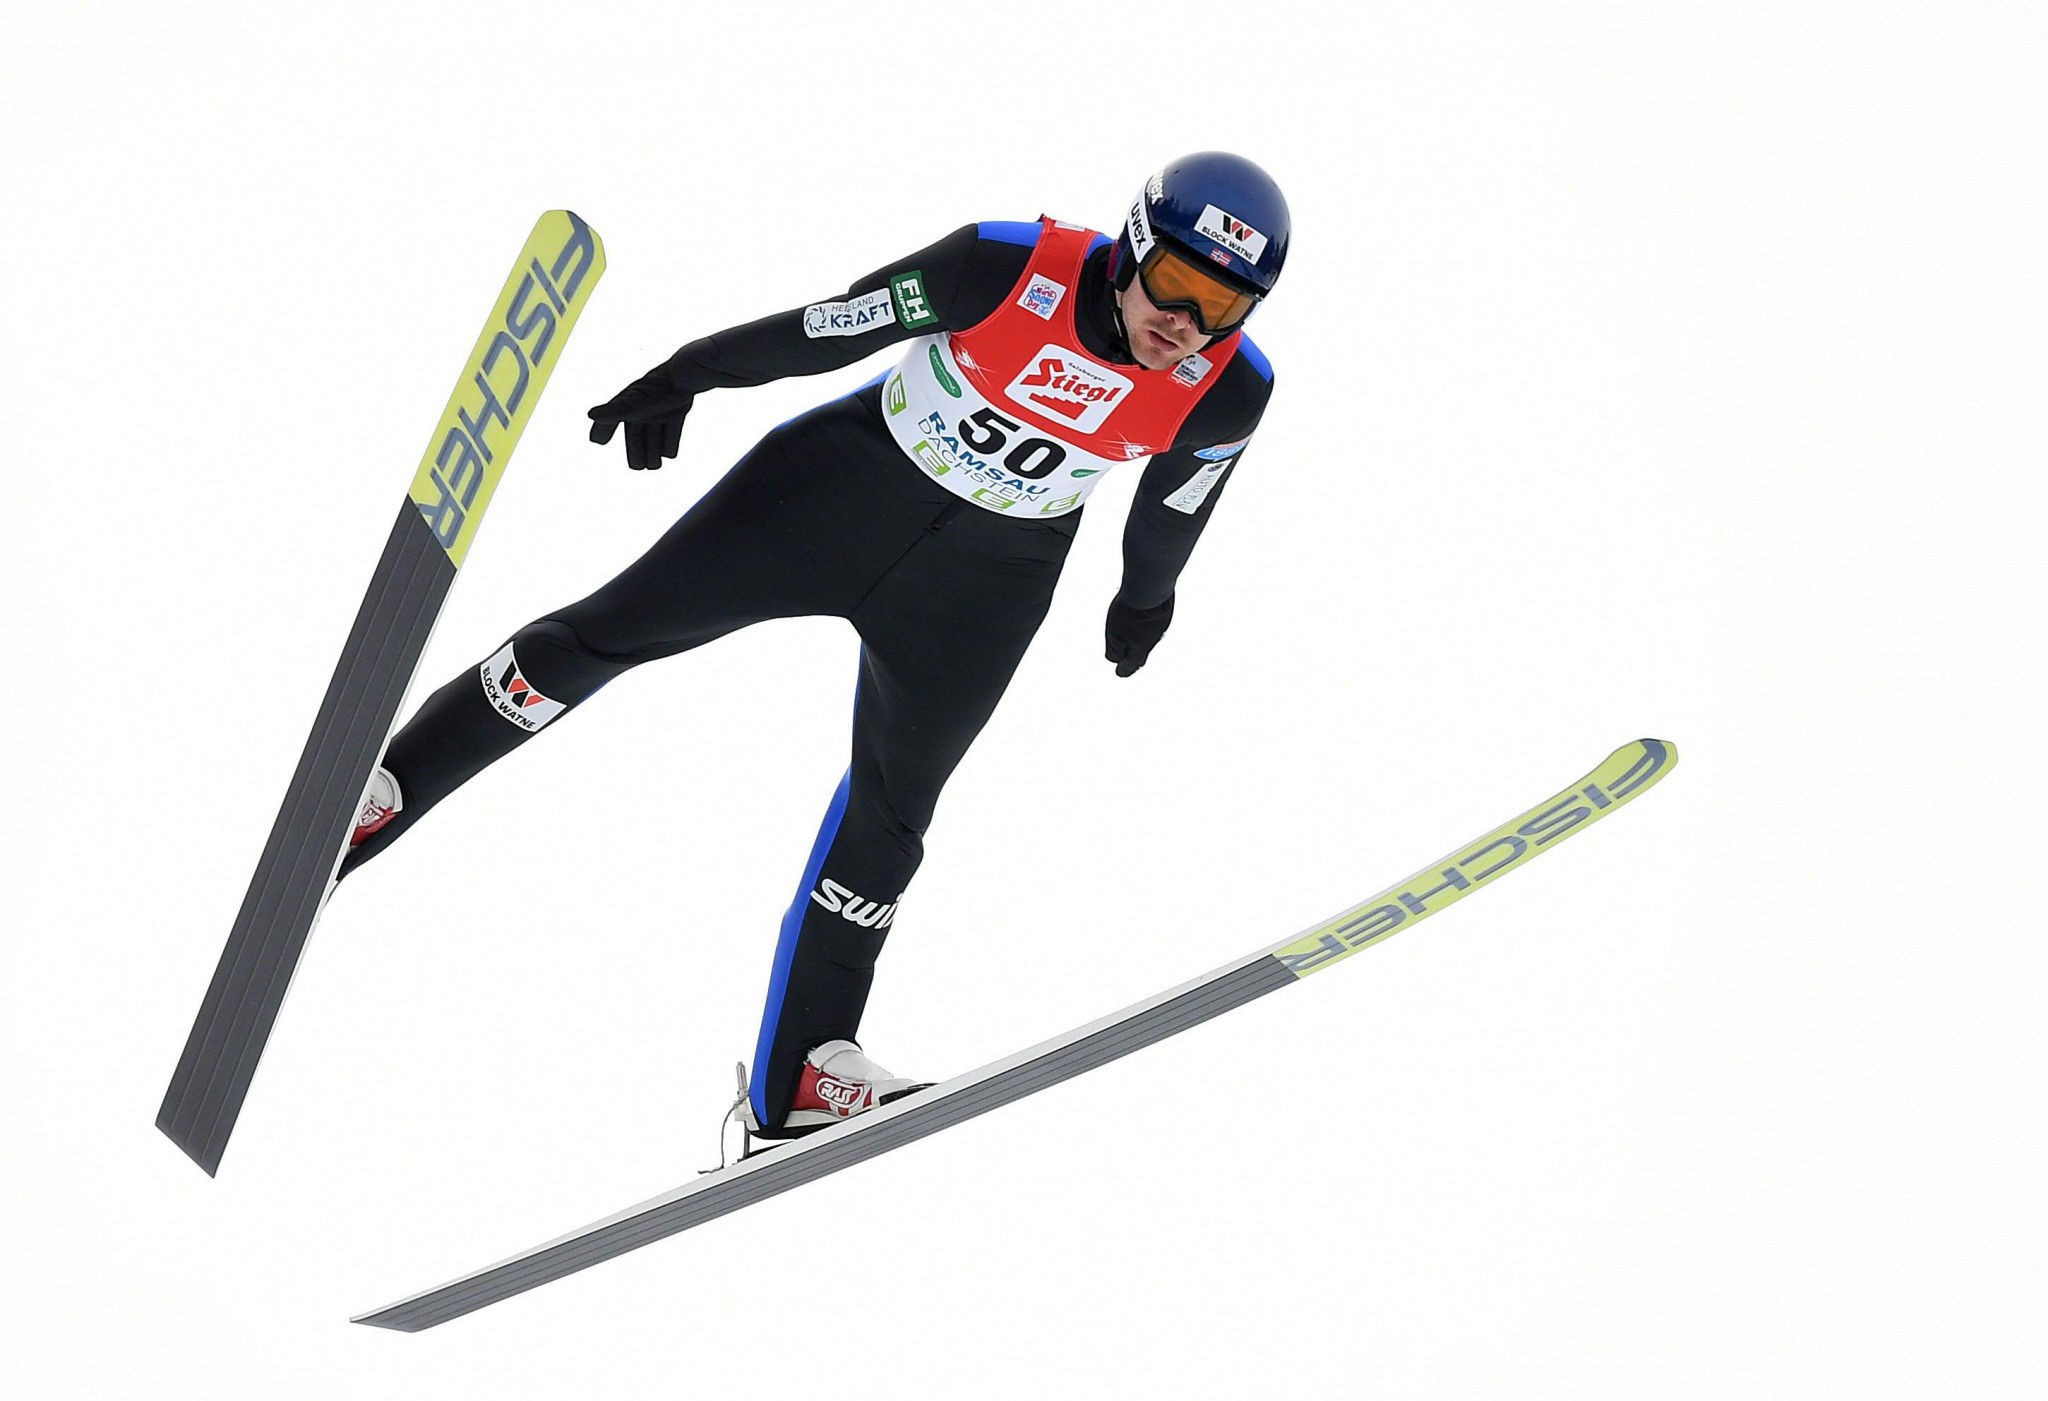 Graabak seeks further success at Nordic Combined World Cup in Otepää 